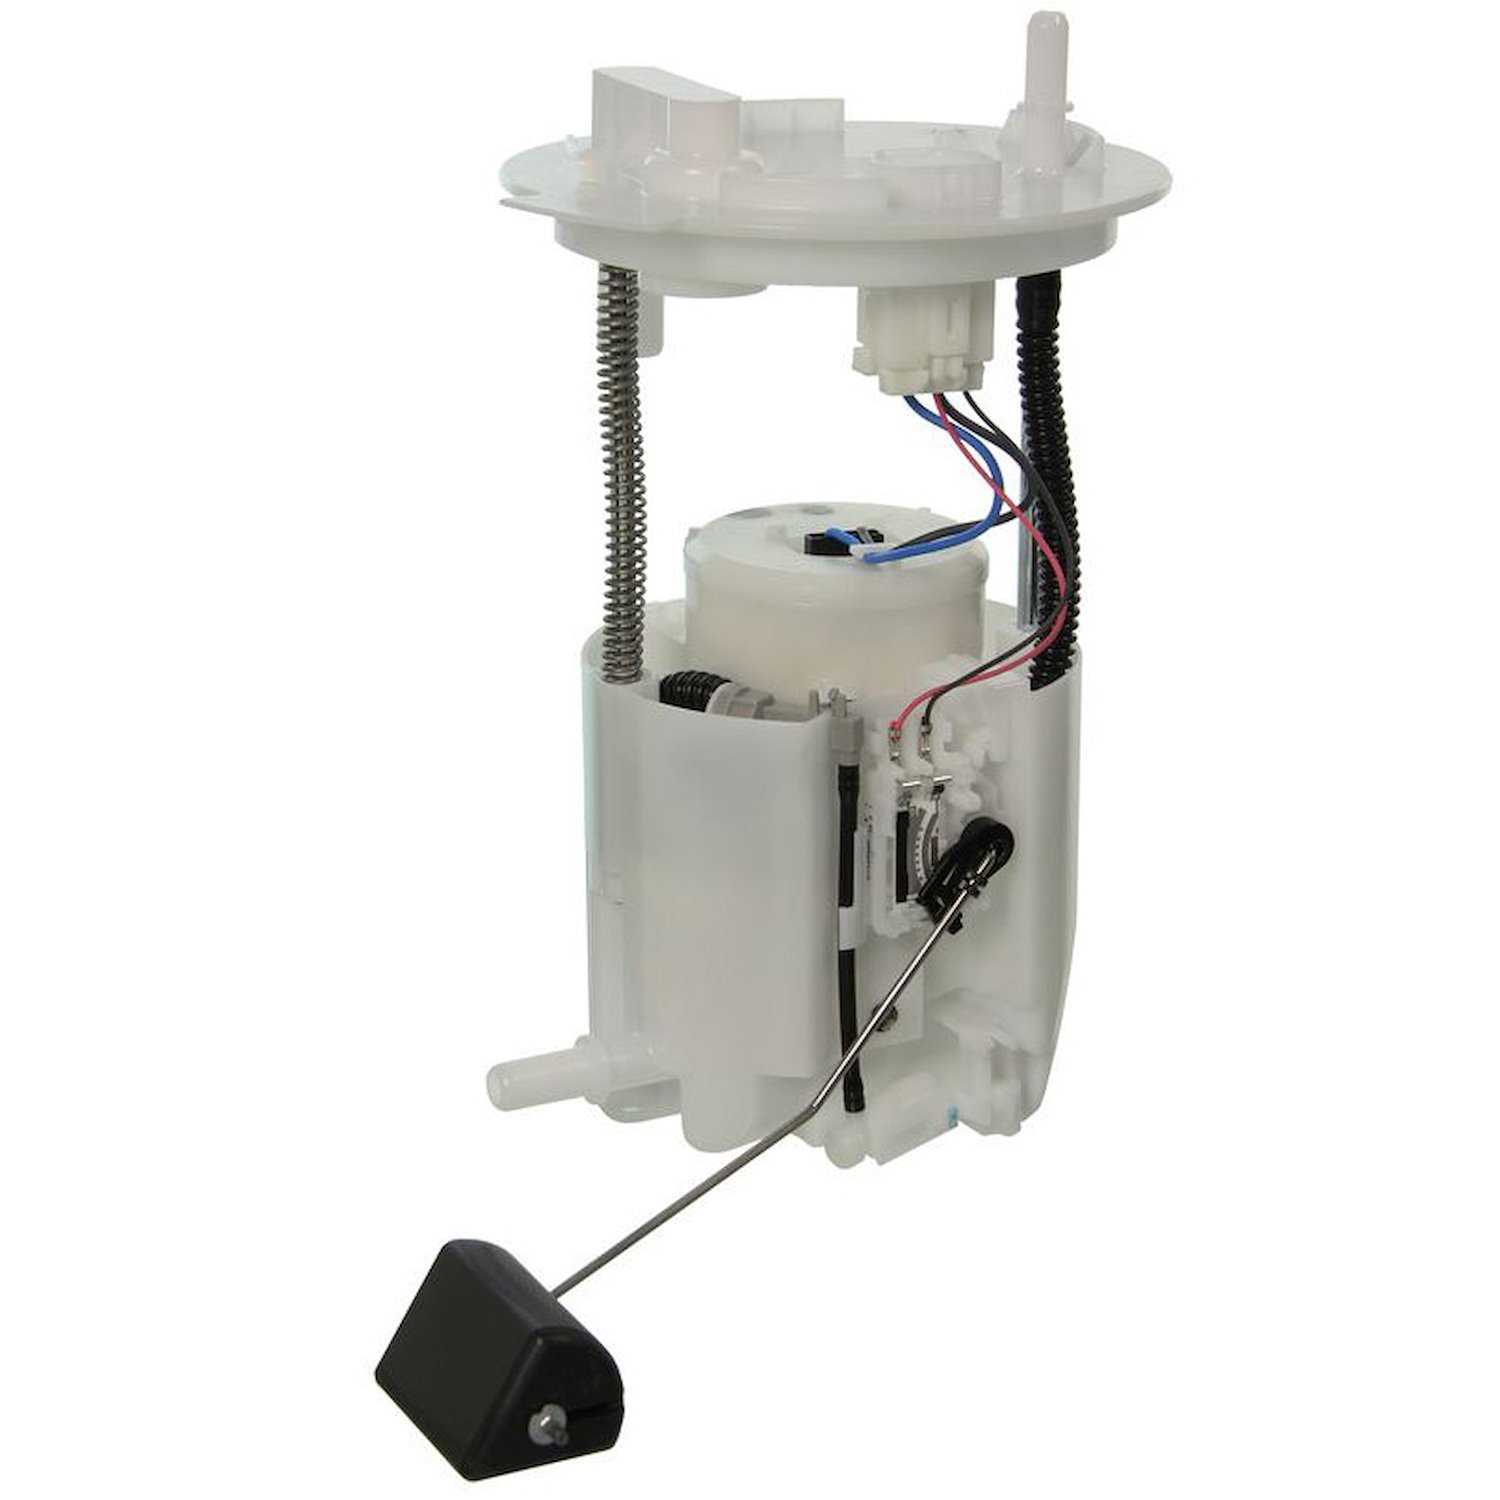 OE Ford Replacement Fuel Pump Module Assembly for 2010-2012 Ford Fusion/2010-2011 Mercury Milan/2011-2012 Lincoln MKZ